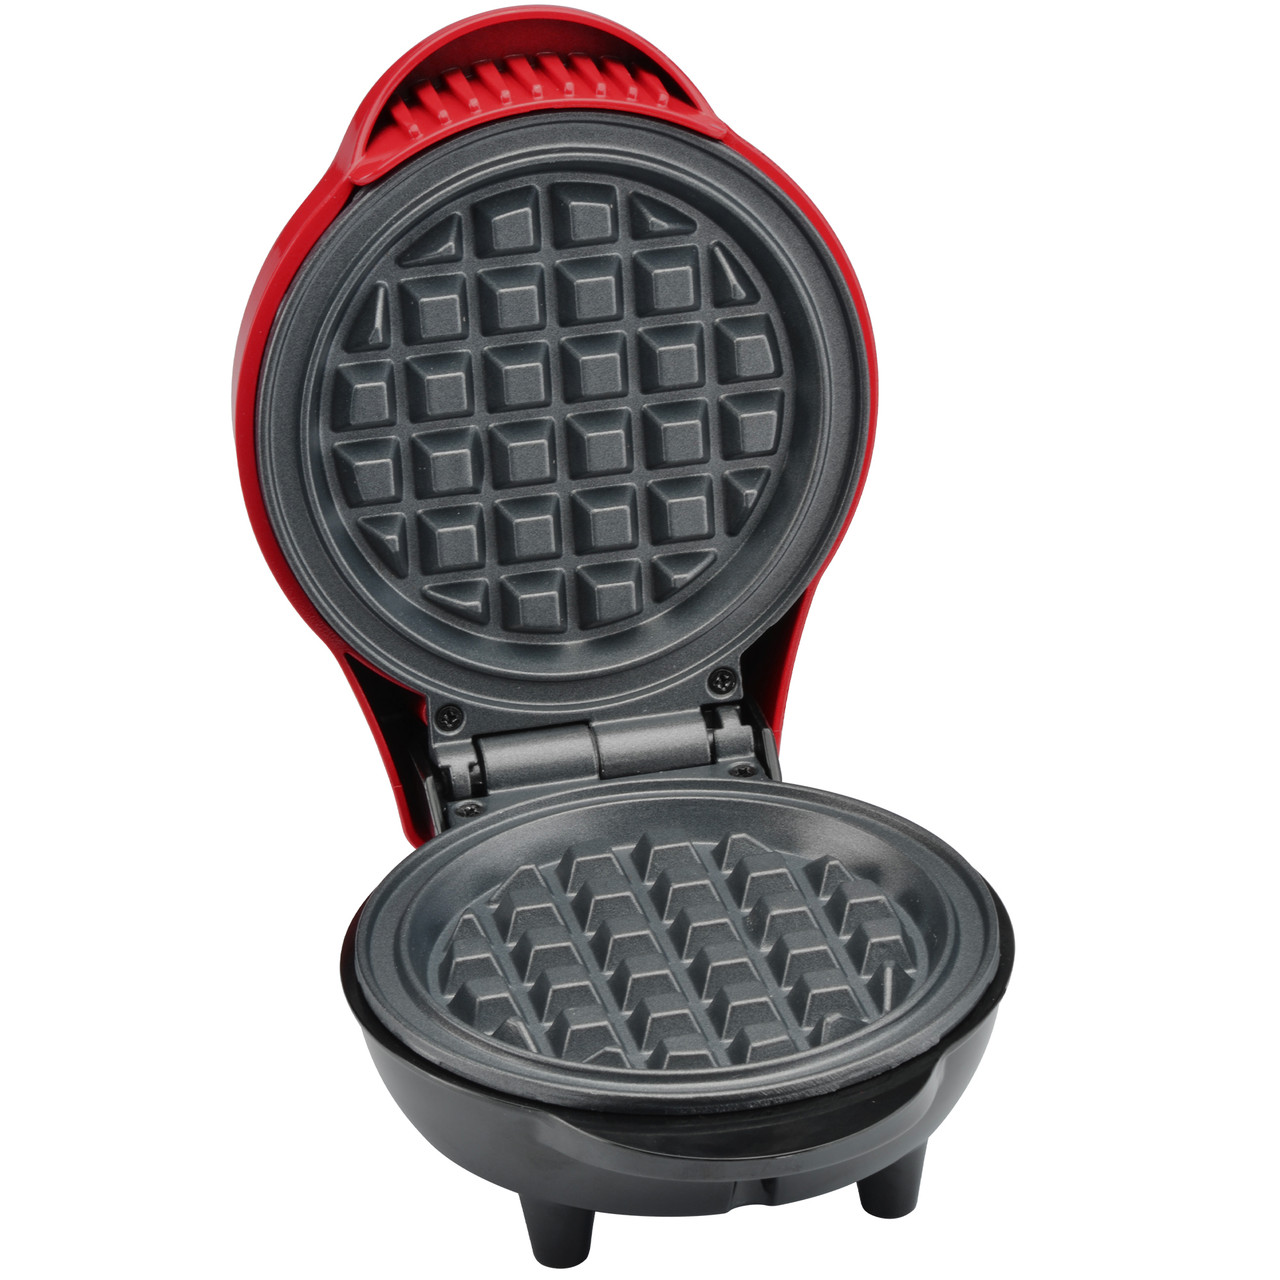 Dash Multi-mini Waffle Maker, Electric Griddles & Waffle Makers